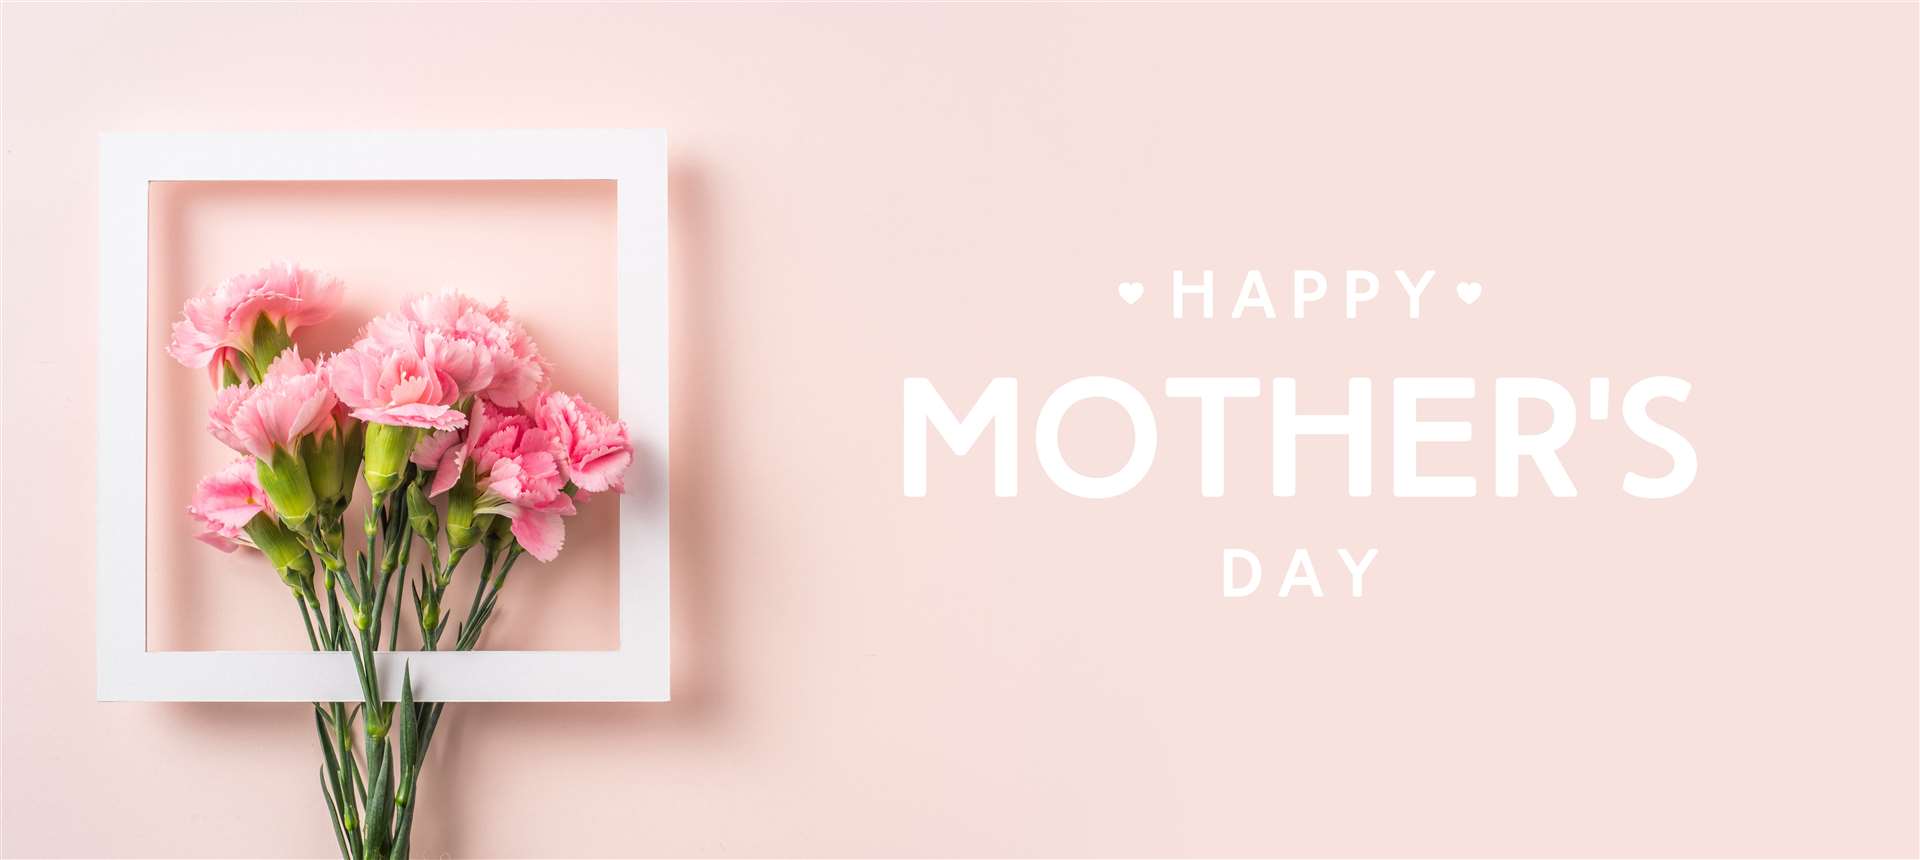 Mothering Sunday is today, March 19.